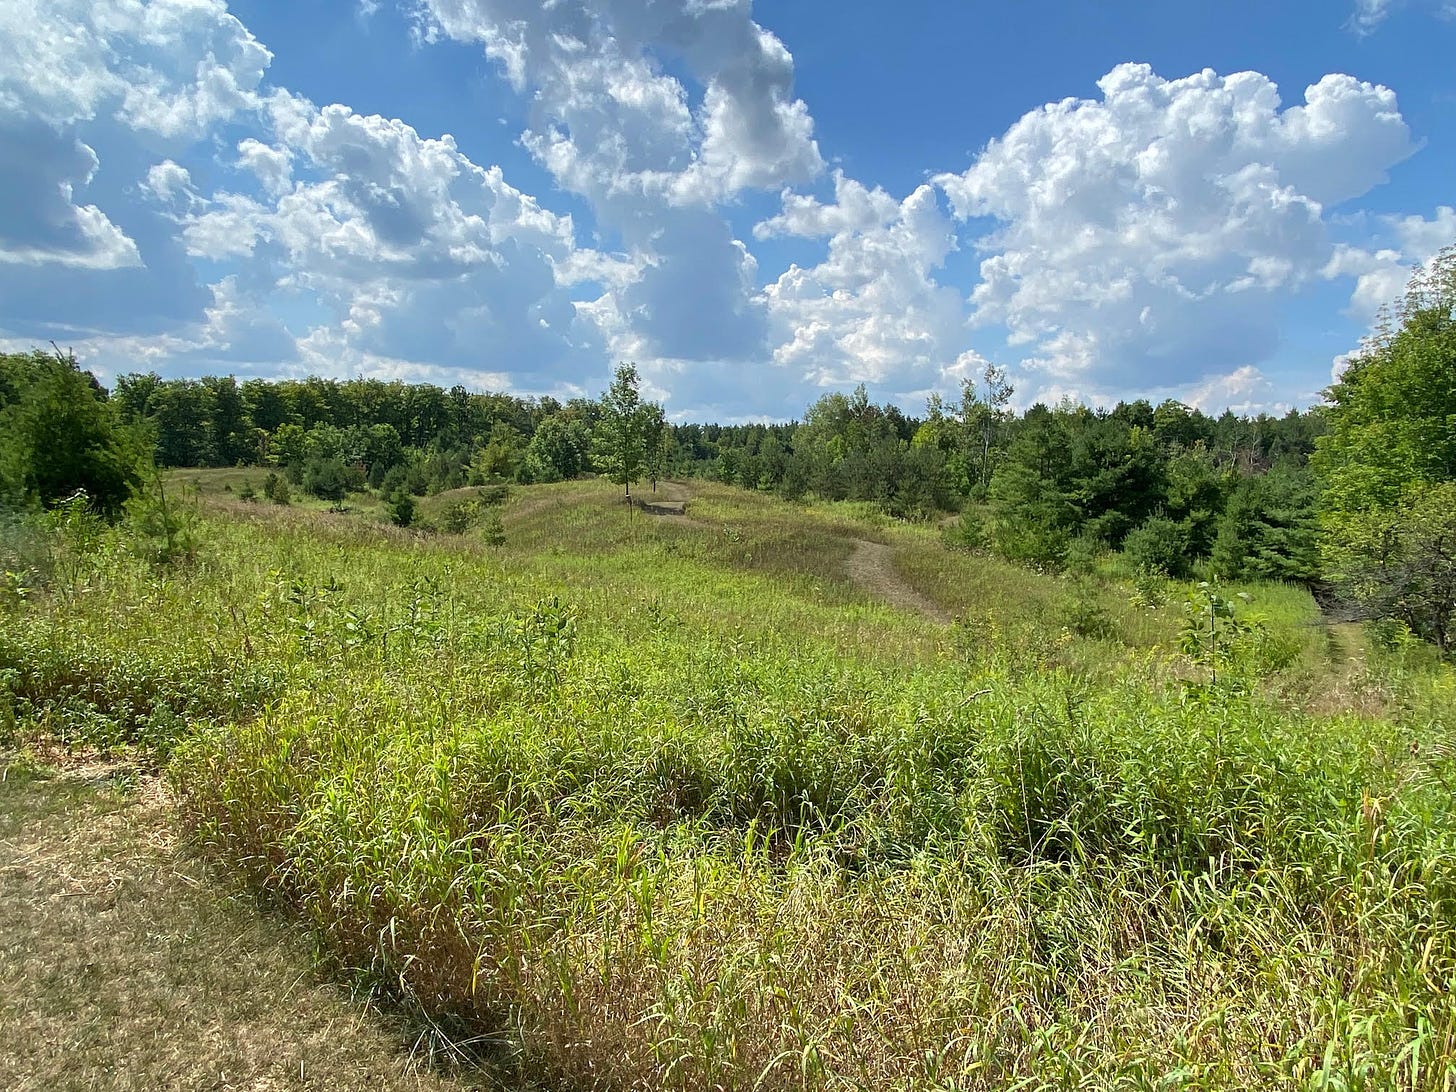 A path winds towards a forest through a field beneath a blue sky with clouds. 